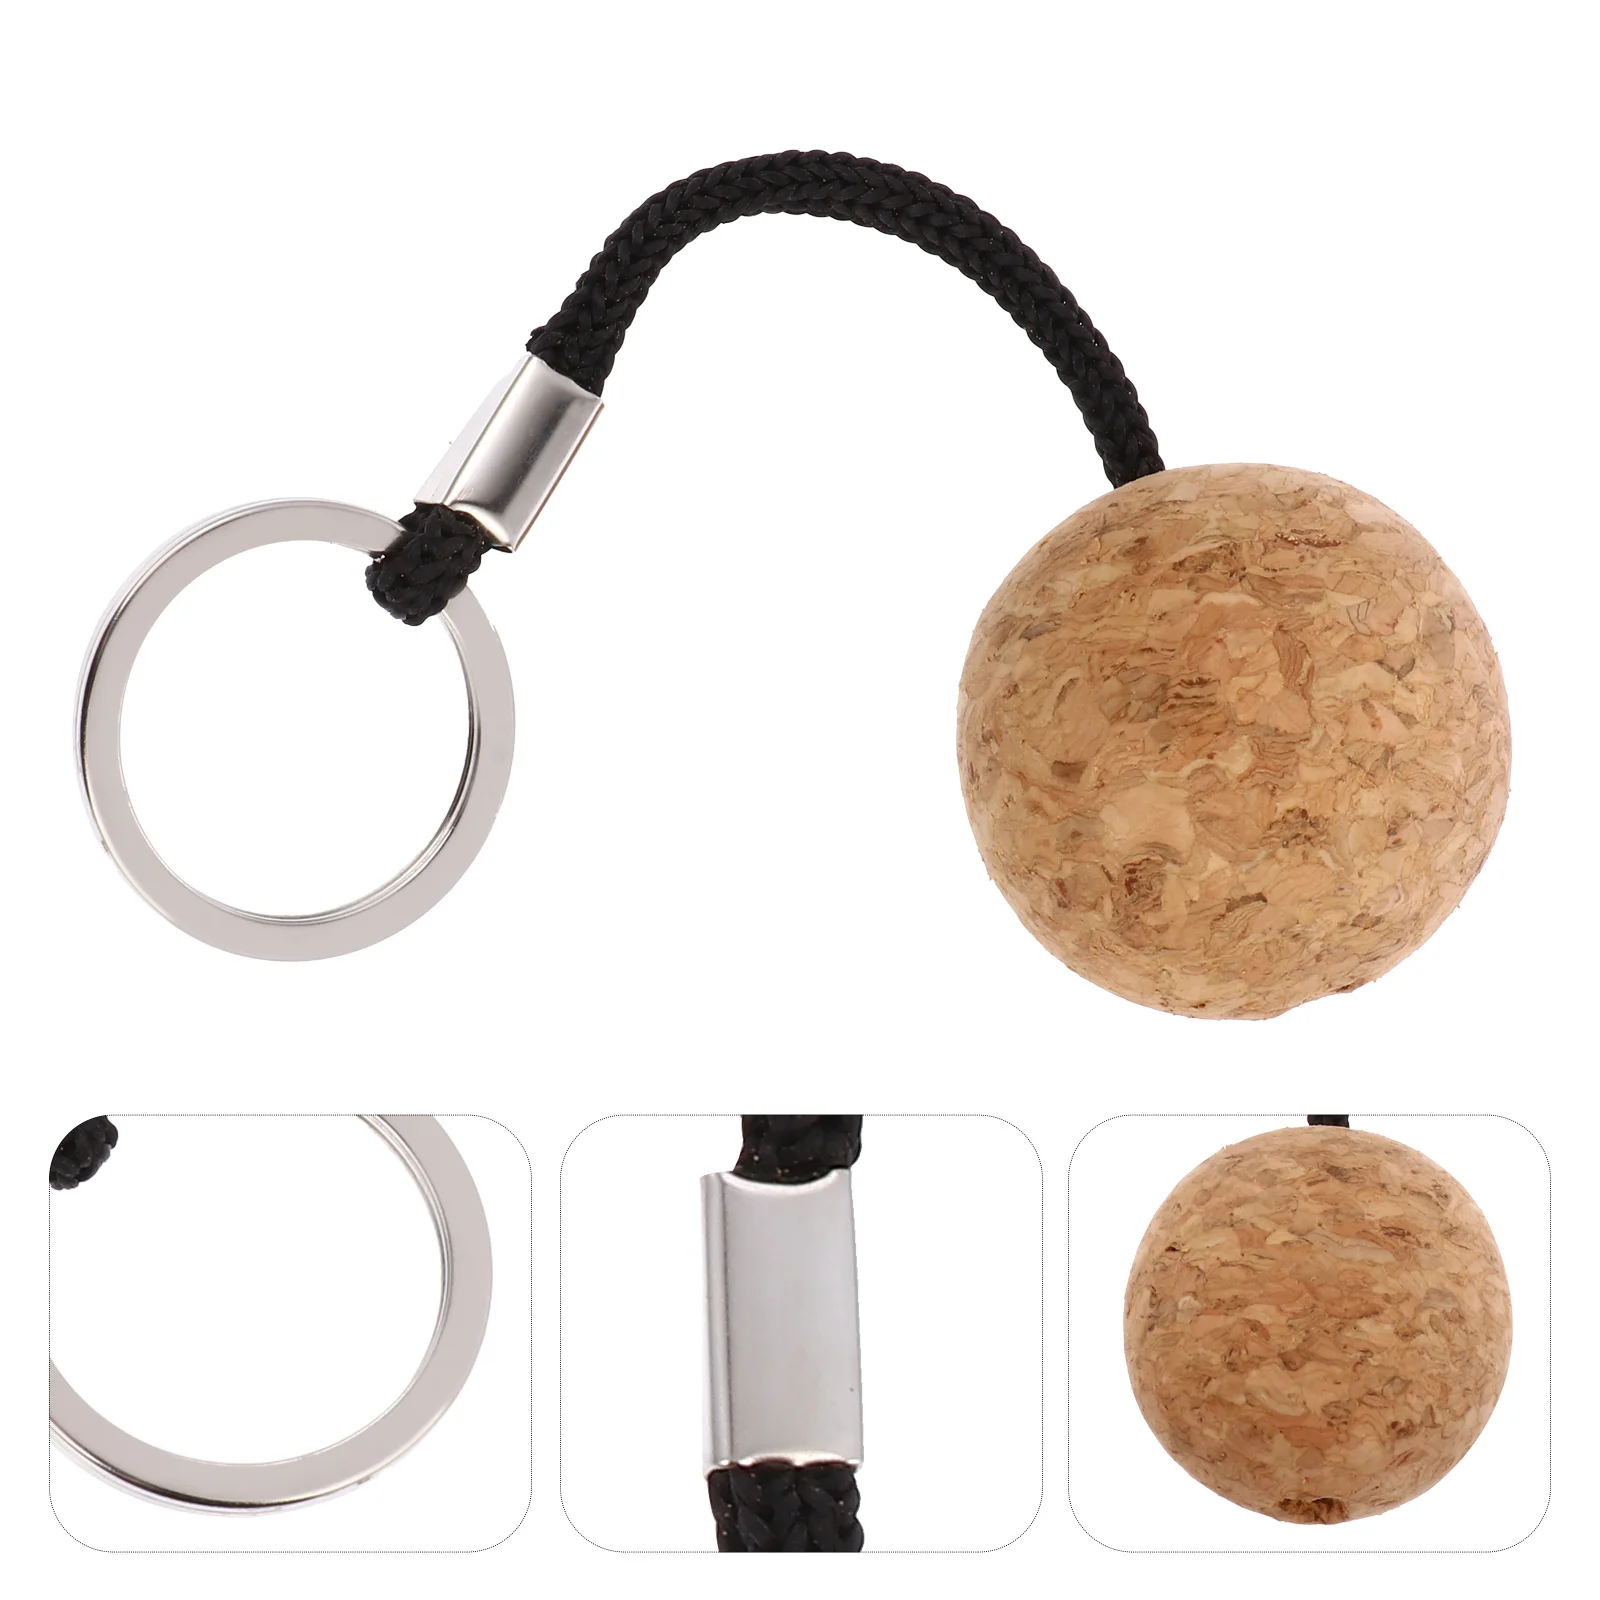 

2 Pcs Circle Key Ring Cork Float Floating Ball Chain Floatable Keychain Sports Wooden Keyring Kayak accessories